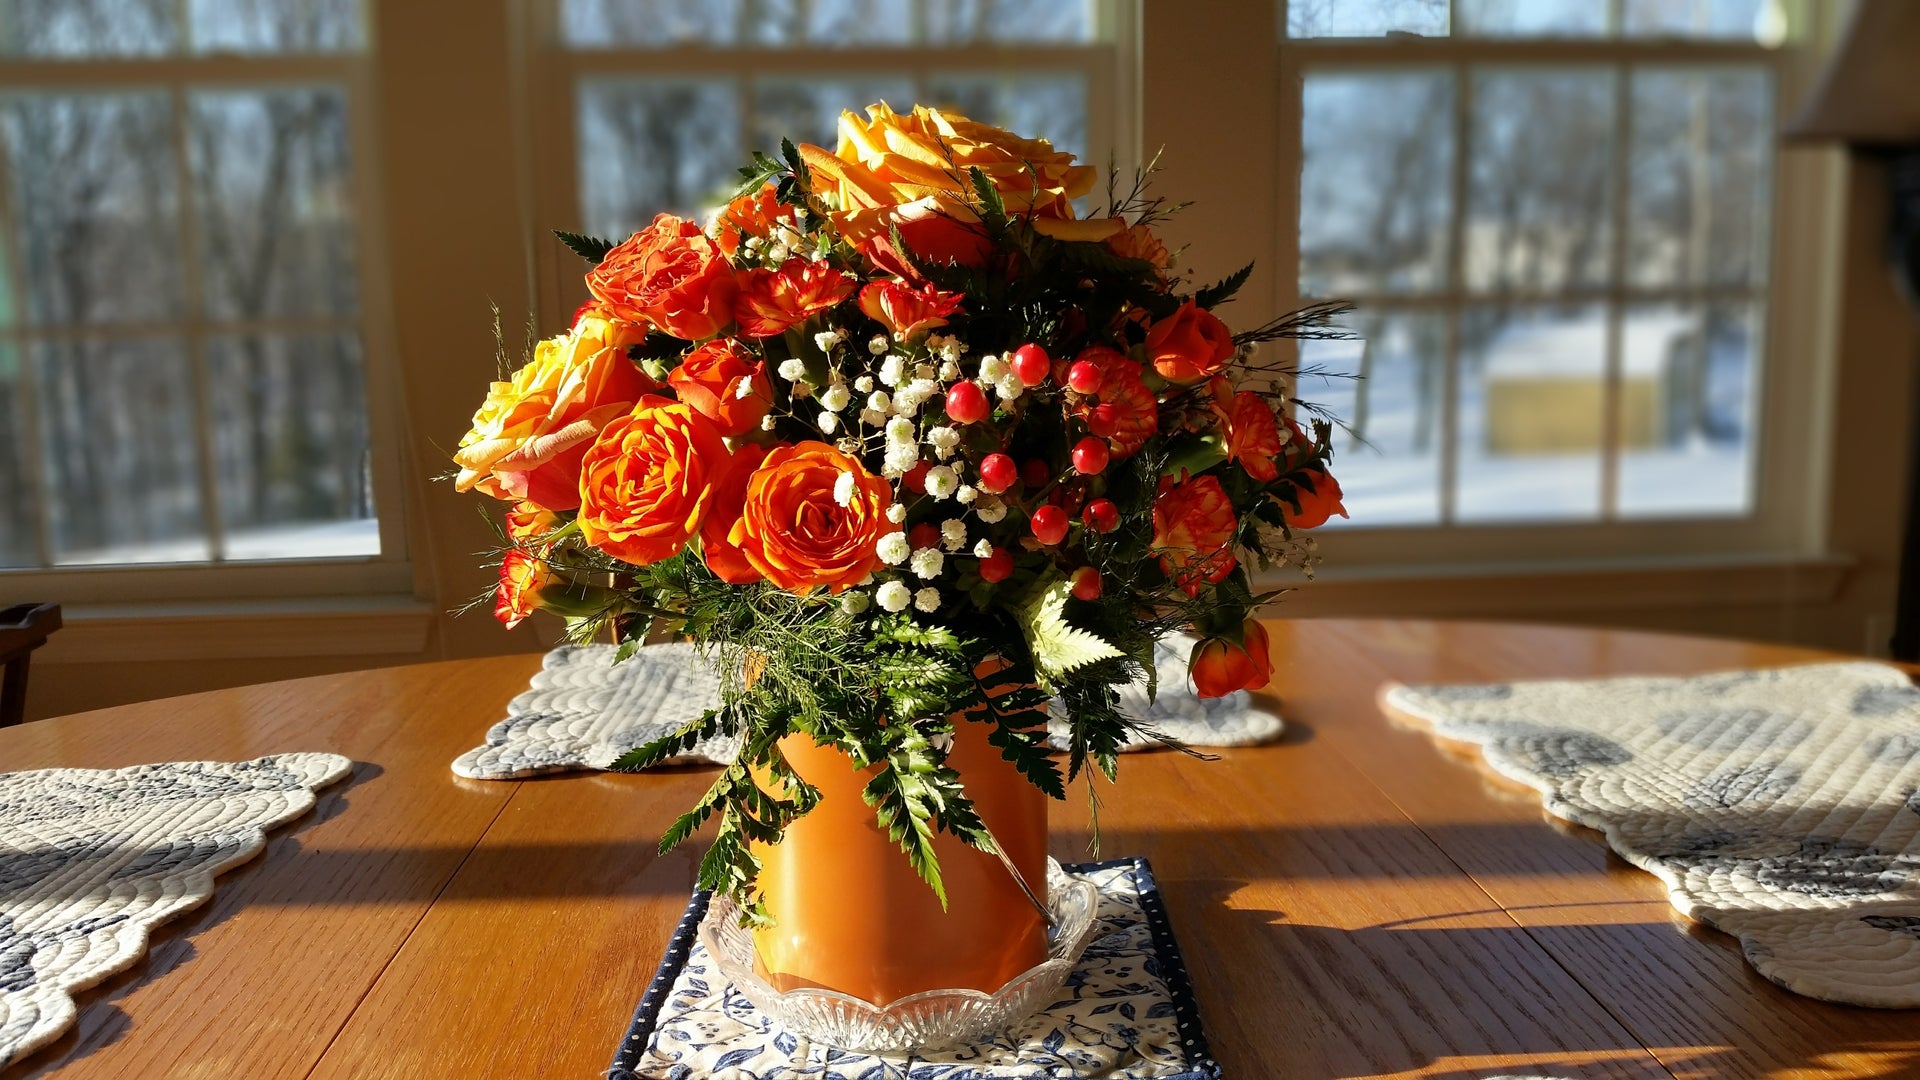 Lovely Centerpiece Ideas for a Winter Party